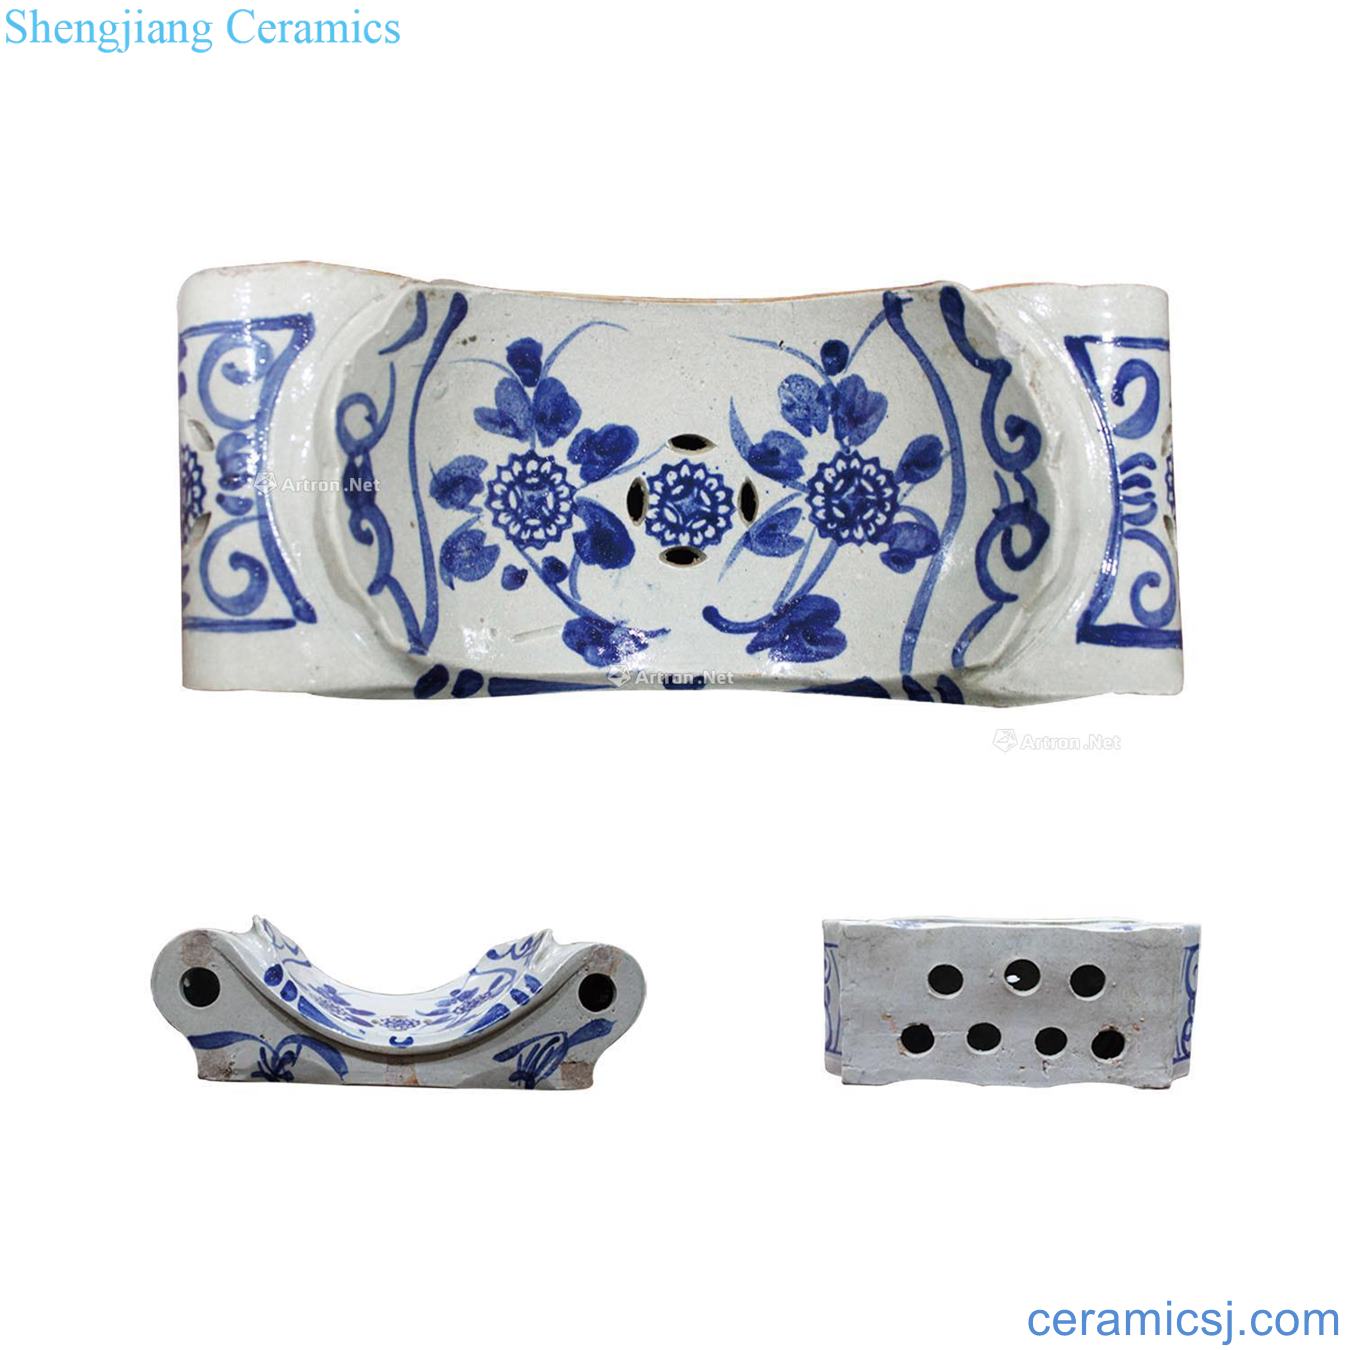 In the qing dynasty blue and white porcelain pillow